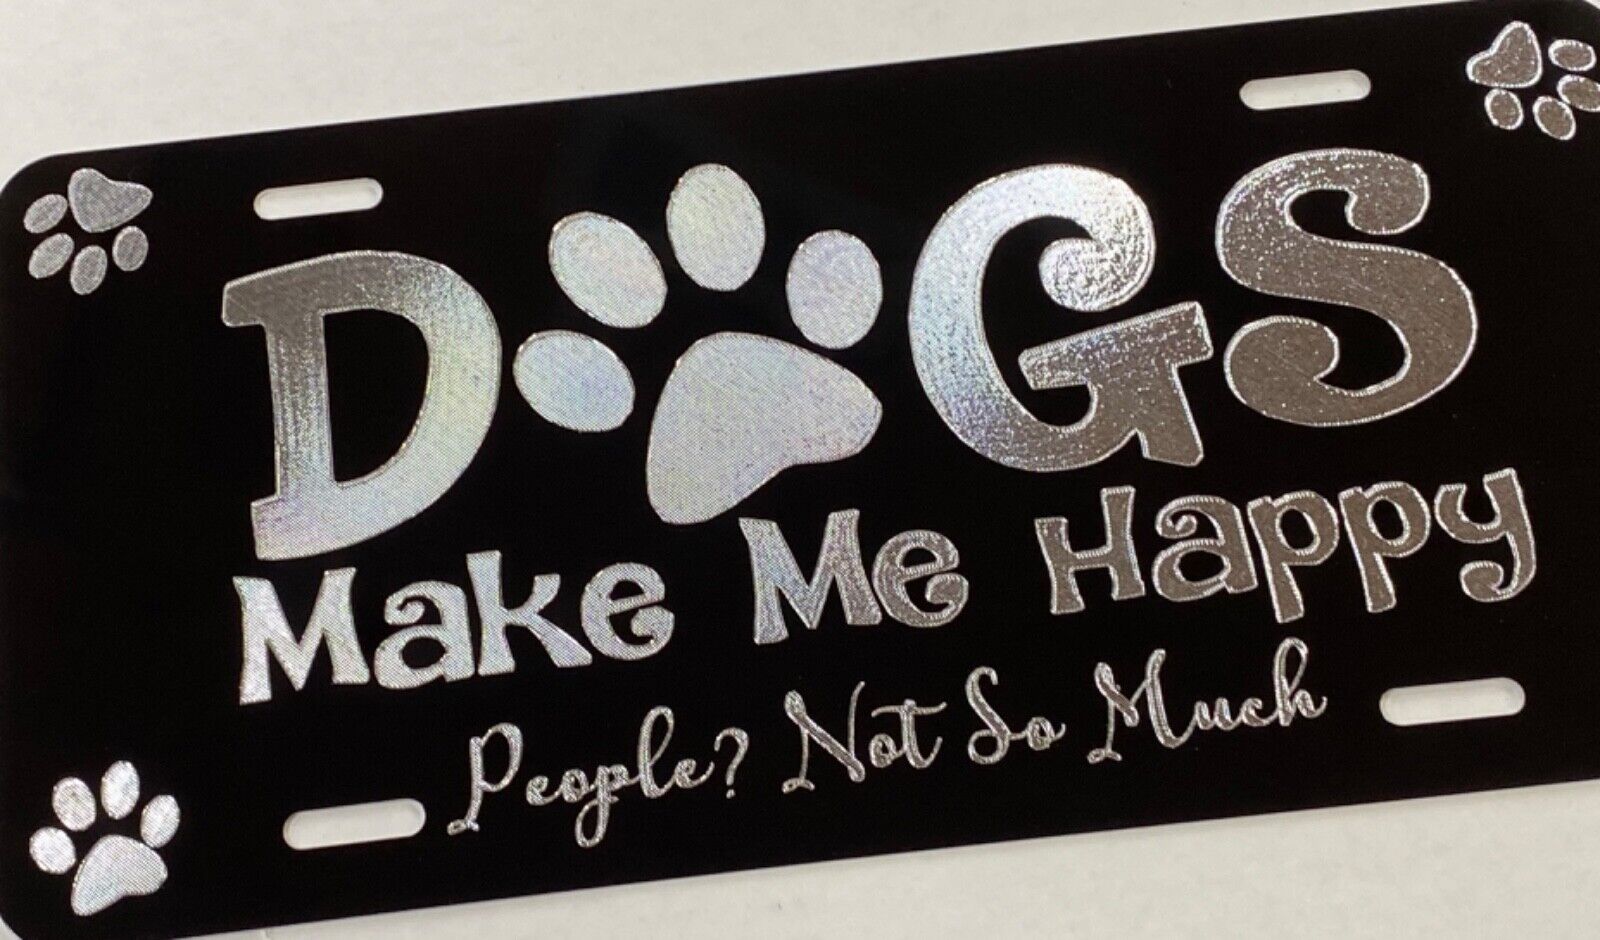 ENGRAVED Dogs Make Me Happy Funny Car Tag Diamond Etched Novelty License Plate